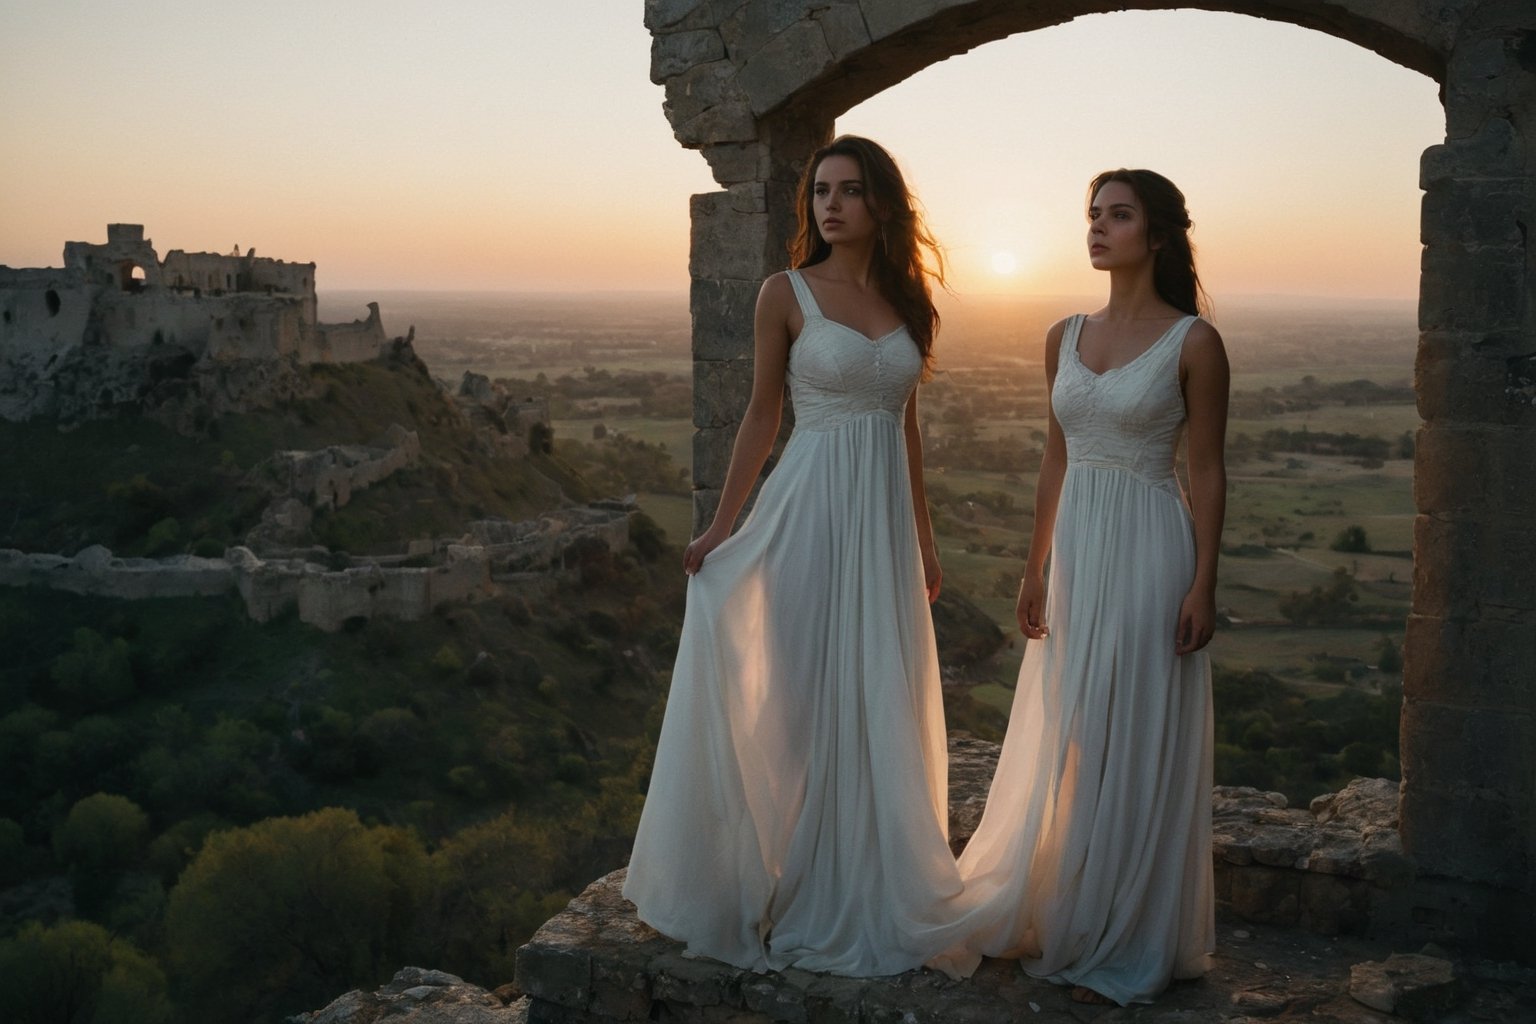 A striking cinematic shot of a young woman standing atop an ancient, crumbling fortress, overlooking a vast landscape. The sun sets in the background, casting a warm golden light over the scene. The woman, dressed in a flowing white dress, gazes intently into the distance, her expression a mixture of determination and melancholy. The overall atmosphere is both majestic and nostalgic, with a touch of mystery and romance., cinematic. Canon 5d Mark 4, Kodak Ektar